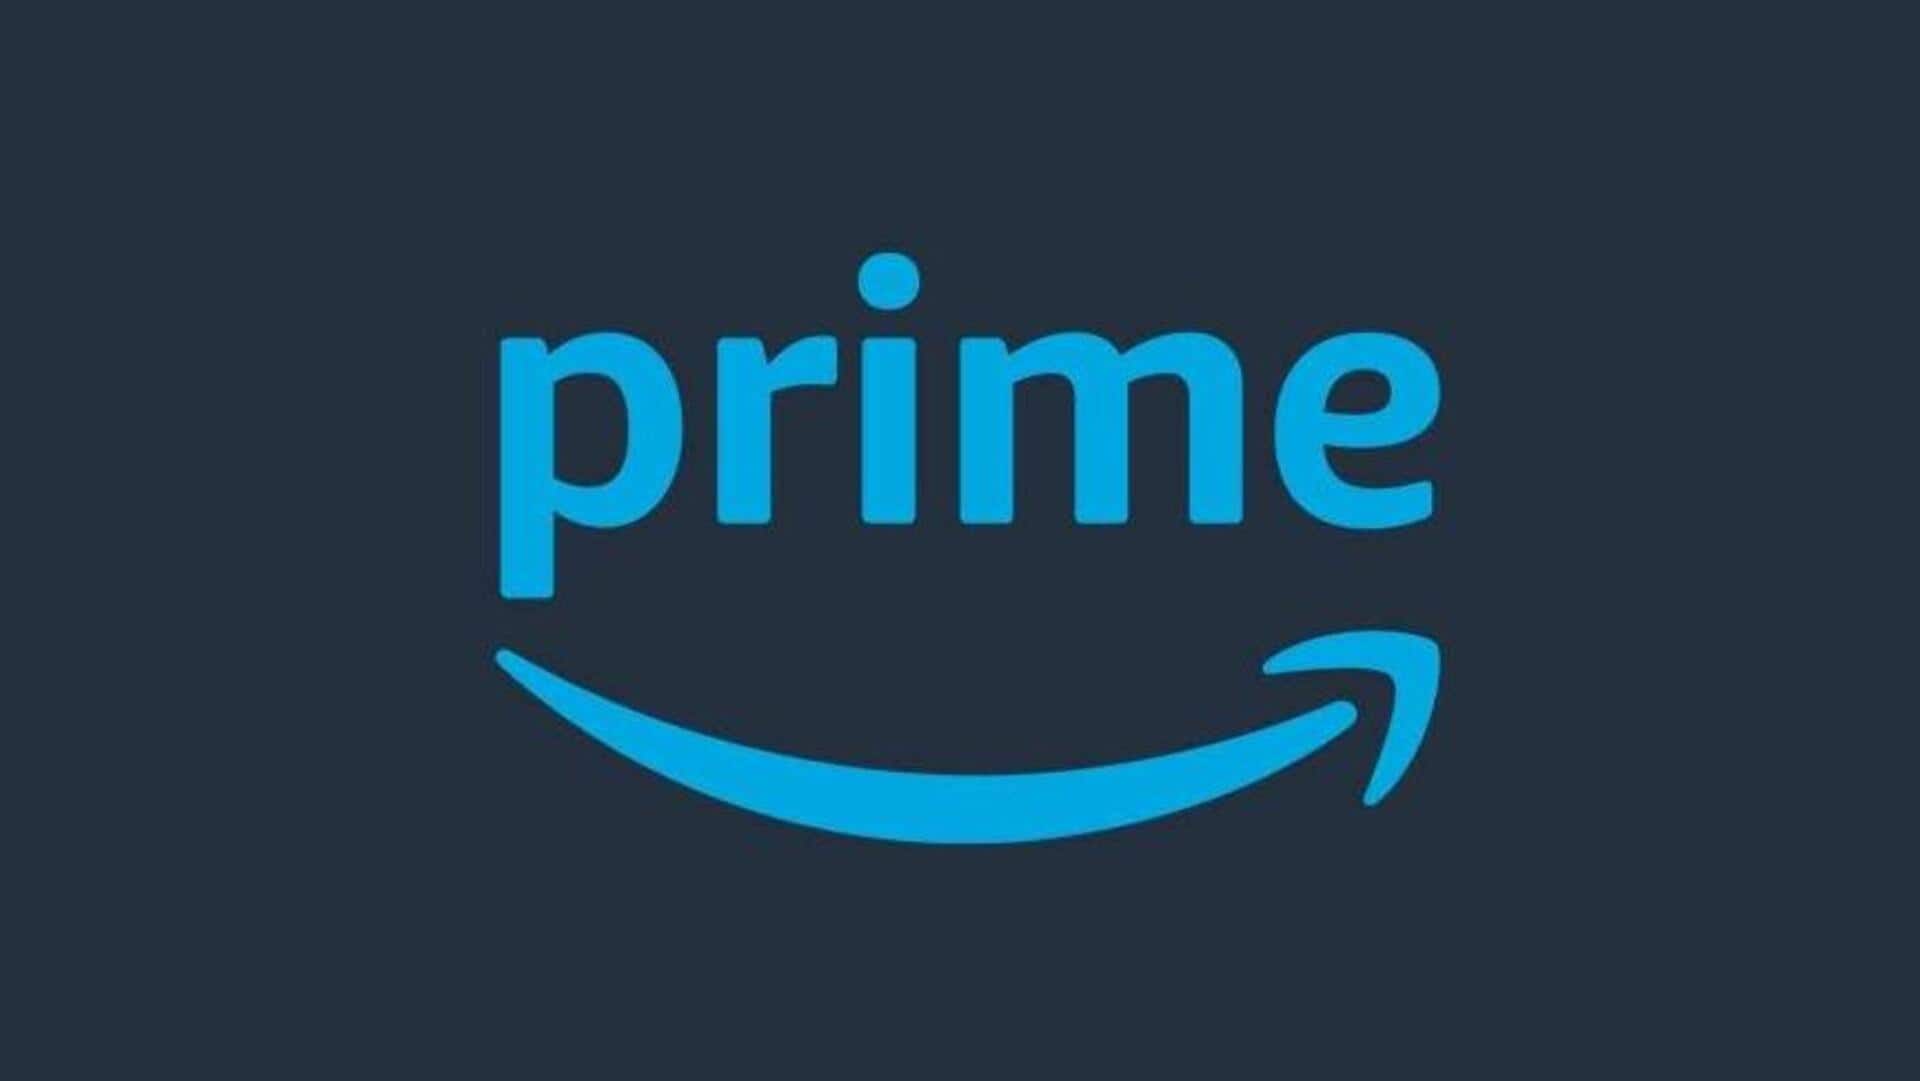 Amazon offer: How to get Prime membership at 50% off